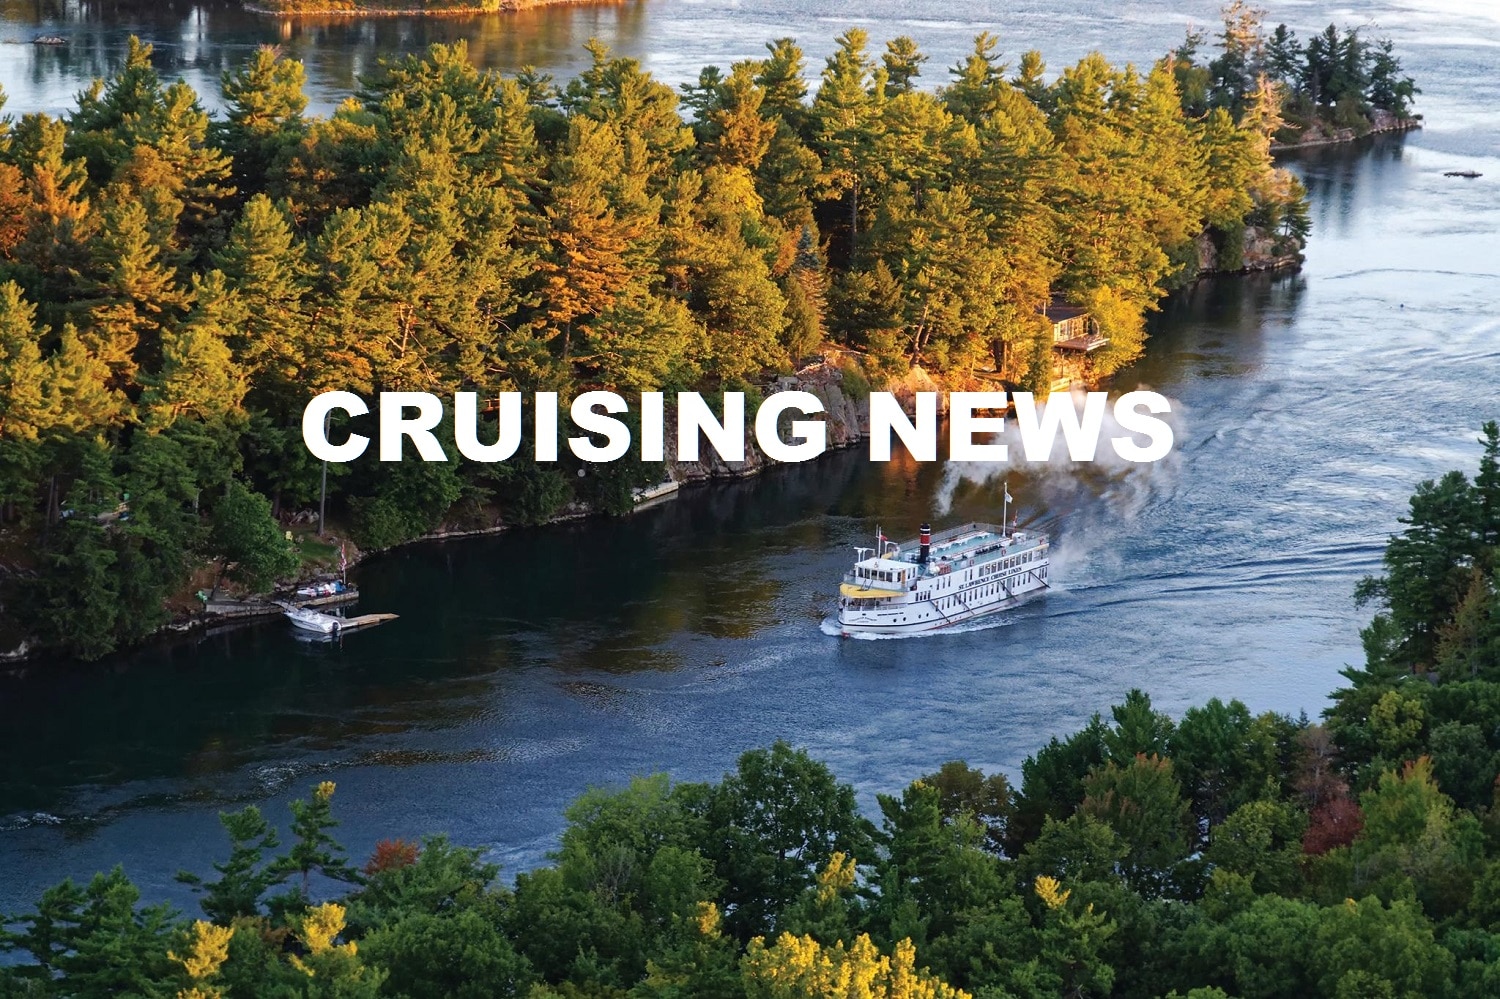 Cruising News and Announcements